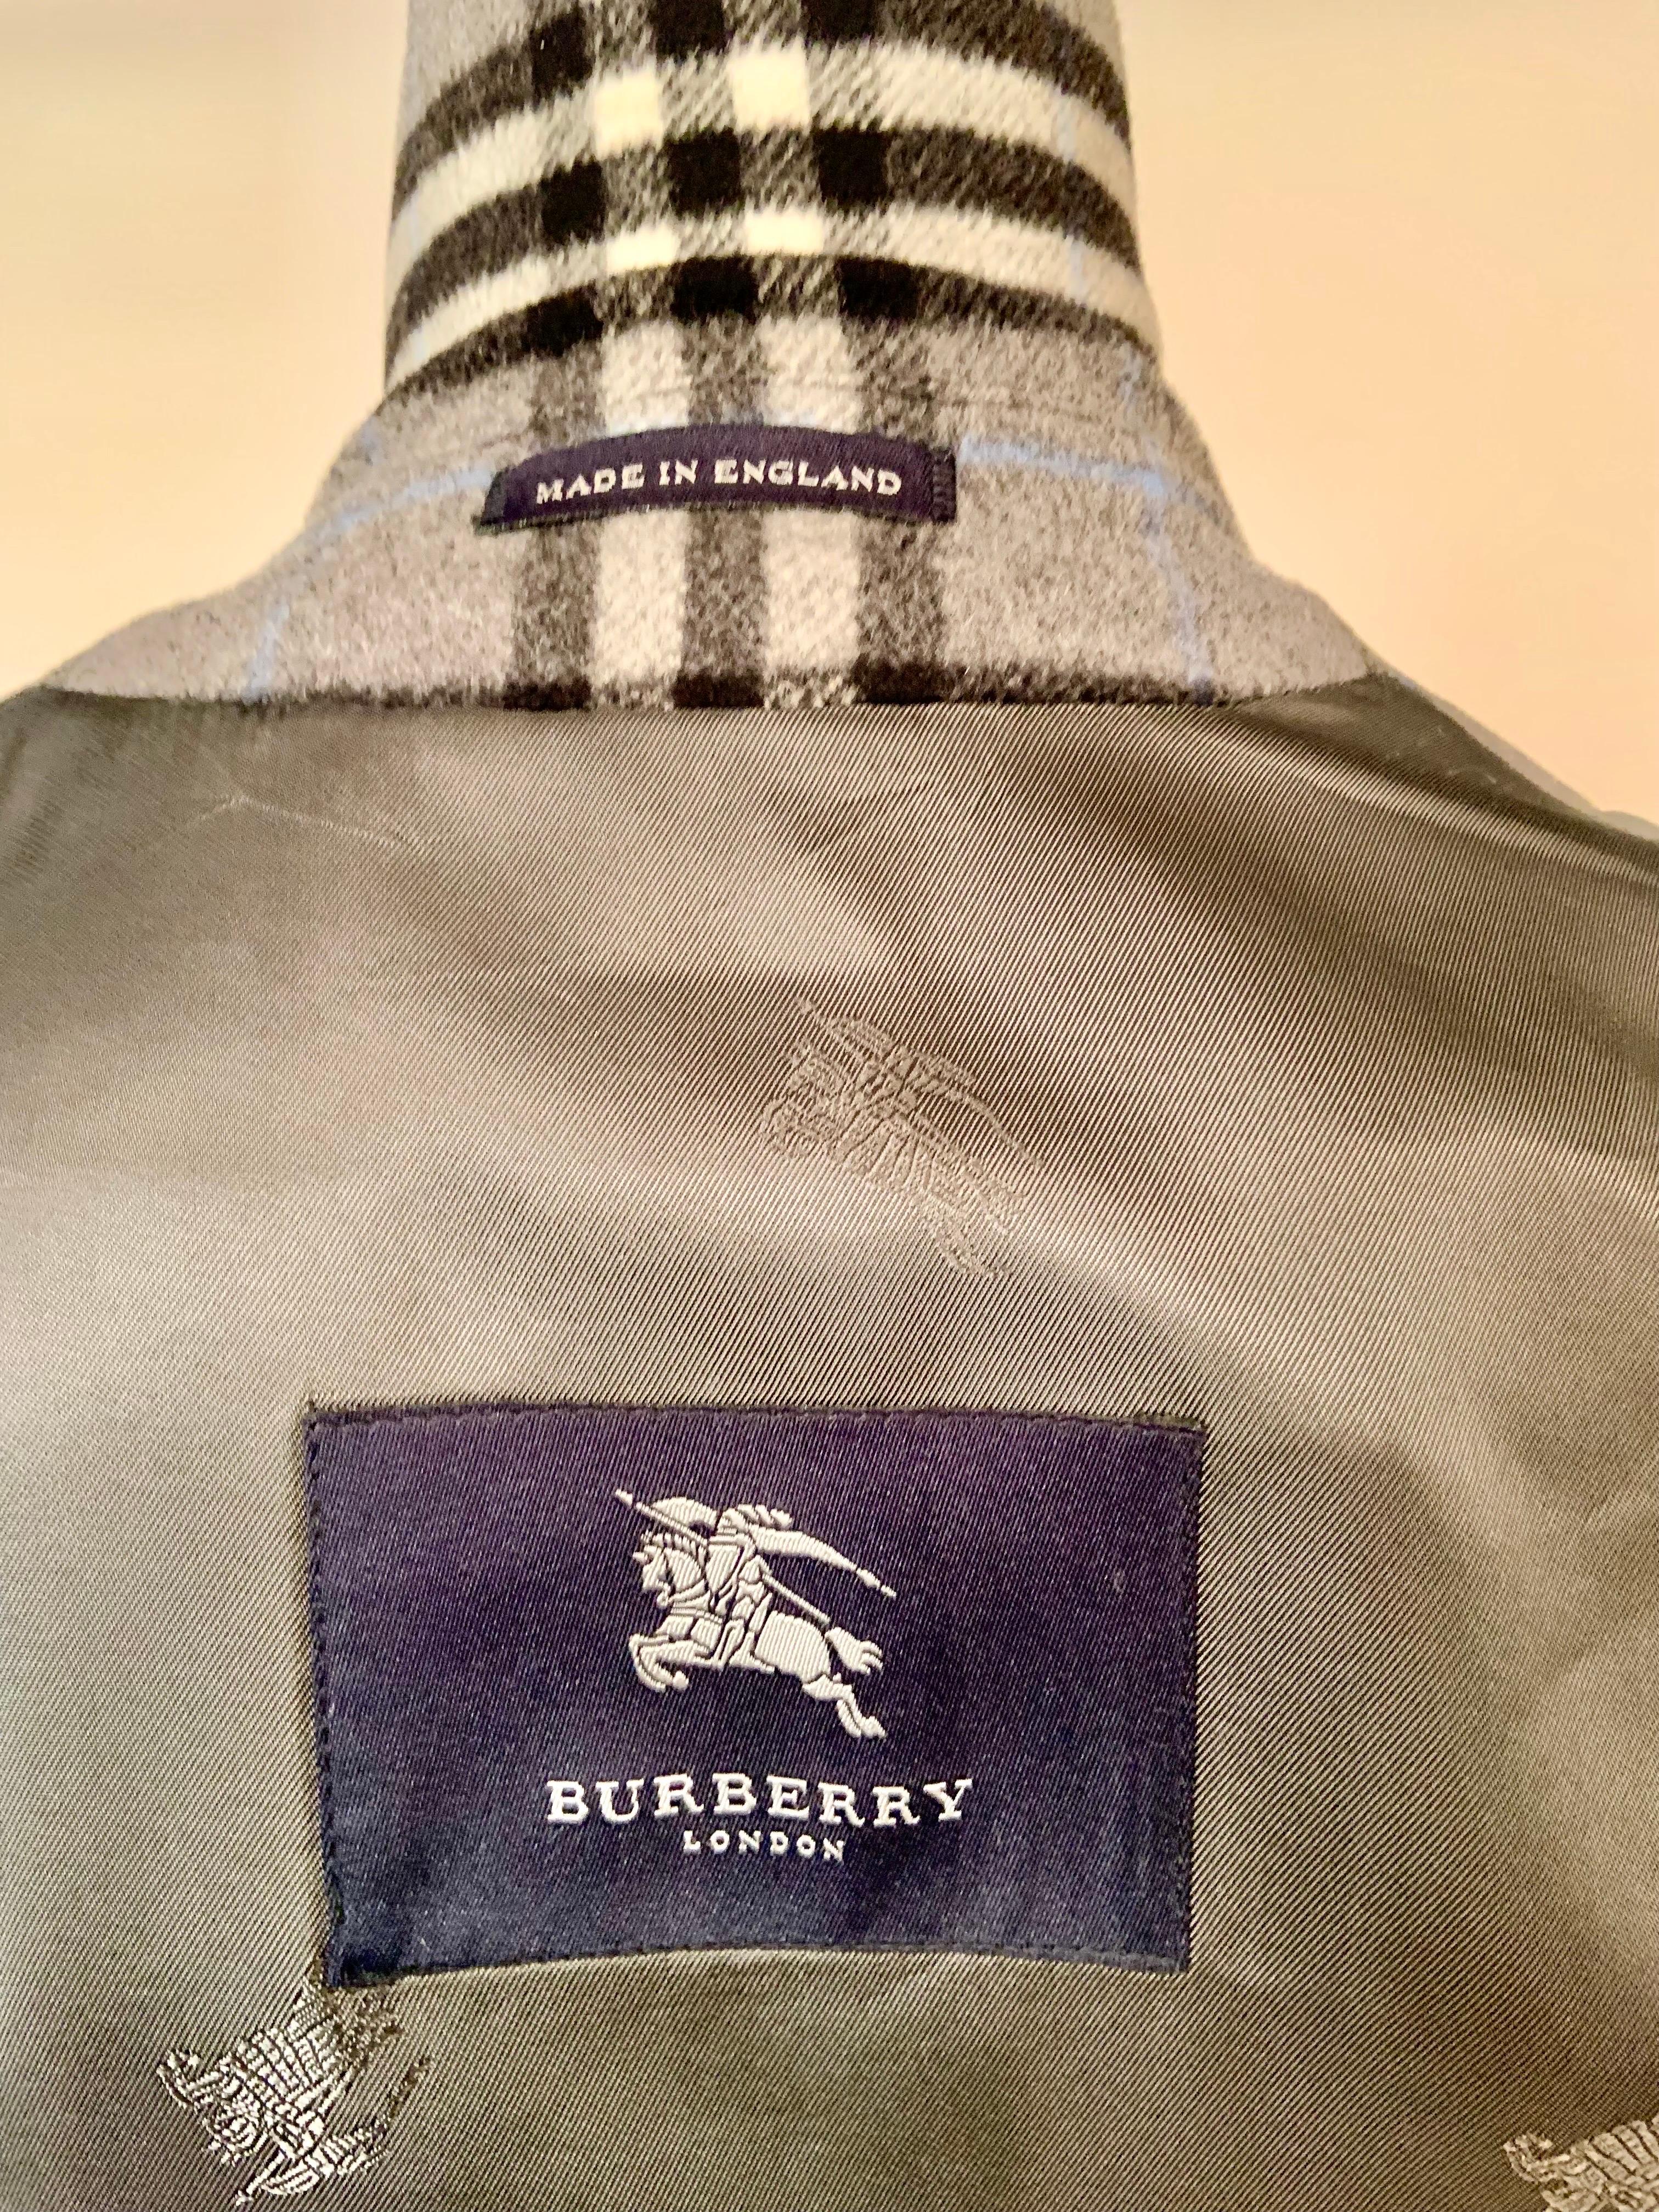 Burberry Plaid Cashmere and Wool Blend Coat and Belt For Sale 5